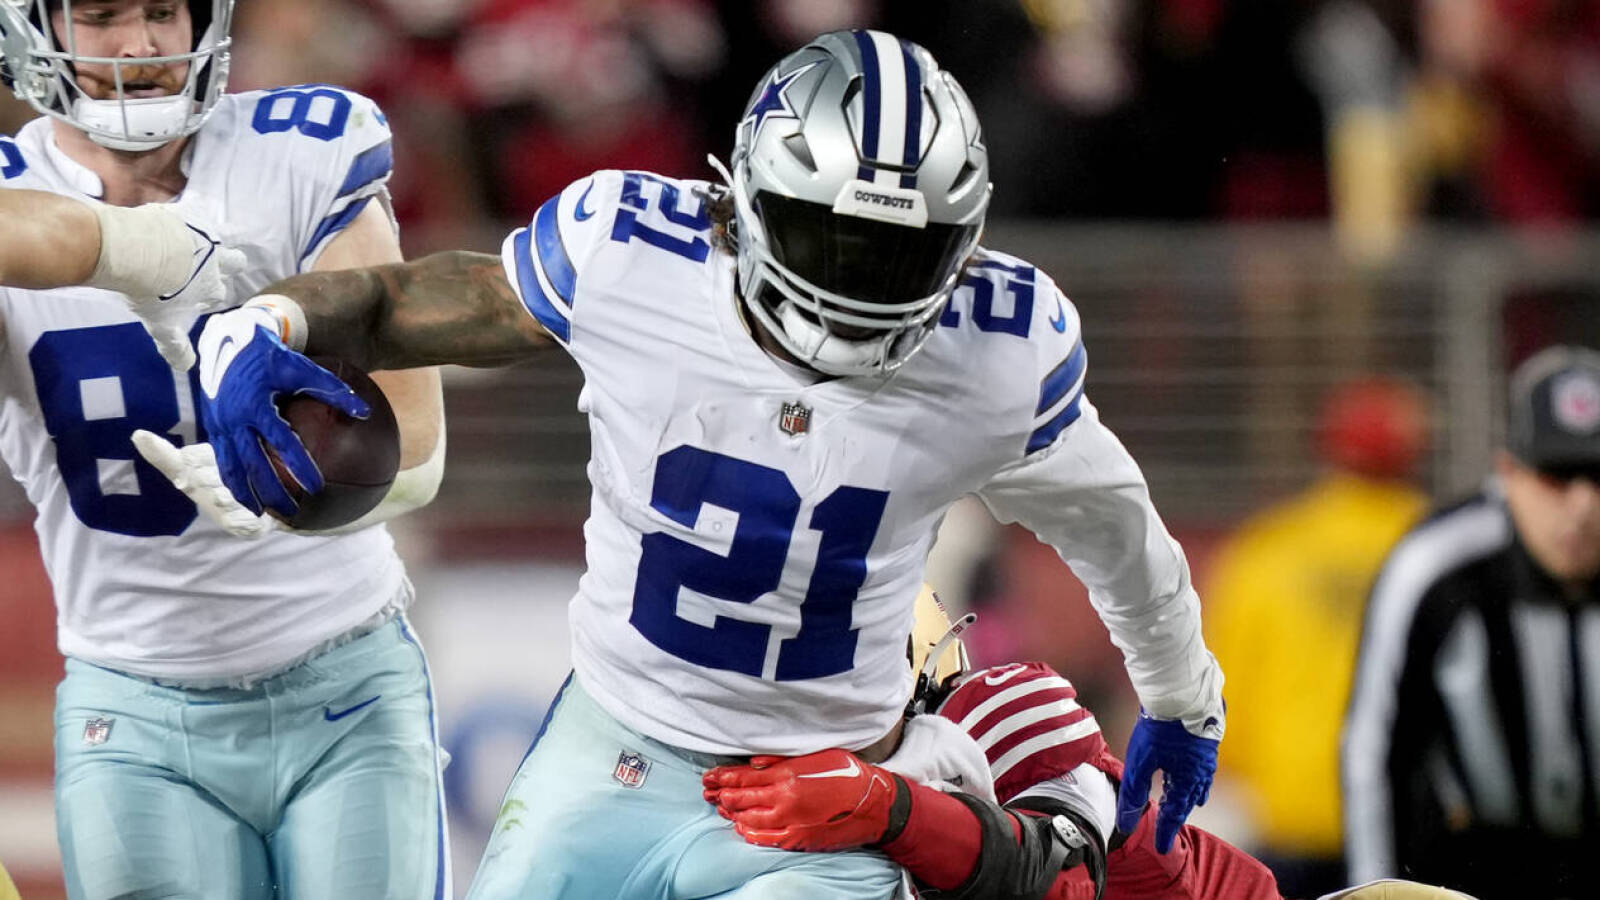 NFL News: Ezekiel Elliott’s Exciting Return and Boosting Dallas Cowboys’ Ground Game with His Comeback